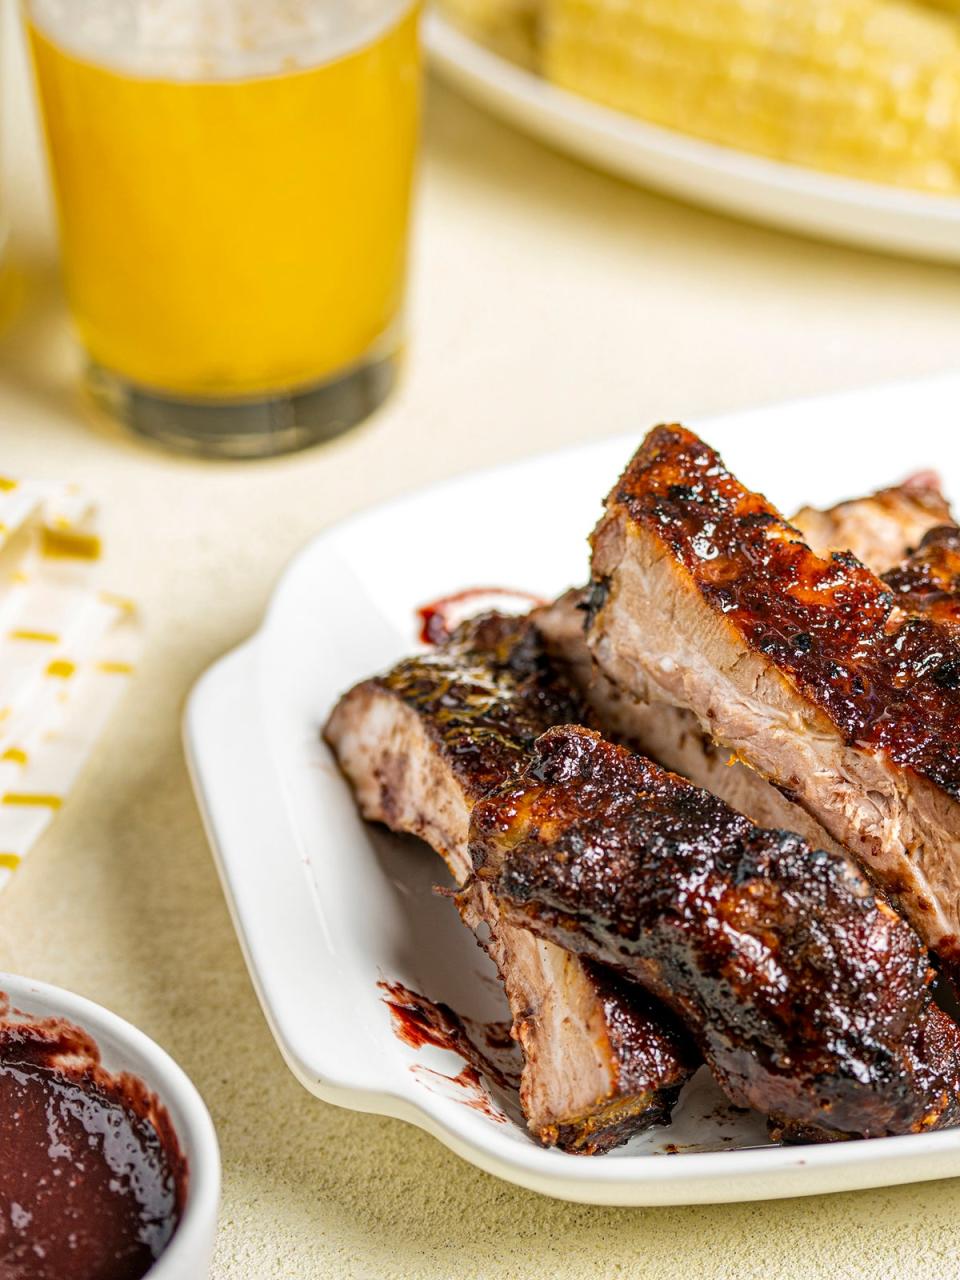 You can use baby back ribs, spareribs or St Louis ribs in this recipe (Peggy Cormary/The Washington Post)